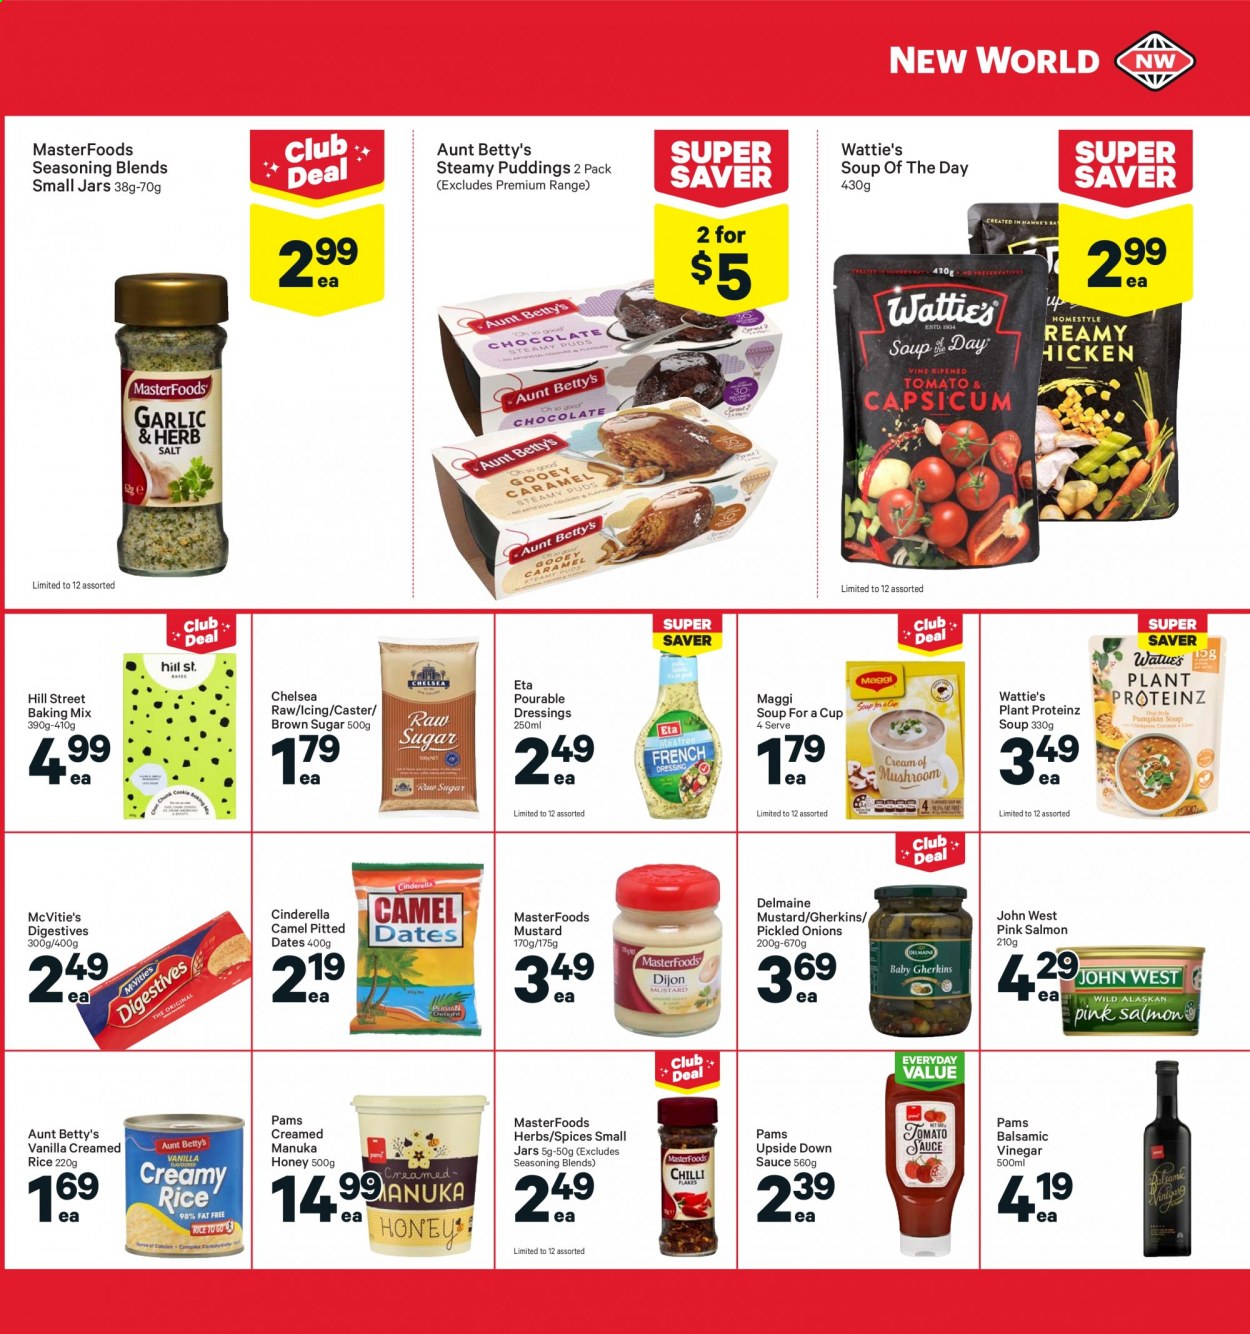 thumbnail - New World mailer - 19.07.2021 - 25.07.2021 - Sales products - salmon, soup, sauce, Wattie's, Delmaine, pudding, cane sugar, Maggi, rice, spice, herbs, mustard, balsamic vinegar, vinegar, Manuka Honey, dried fruit, Camel, dried dates. Page 21.